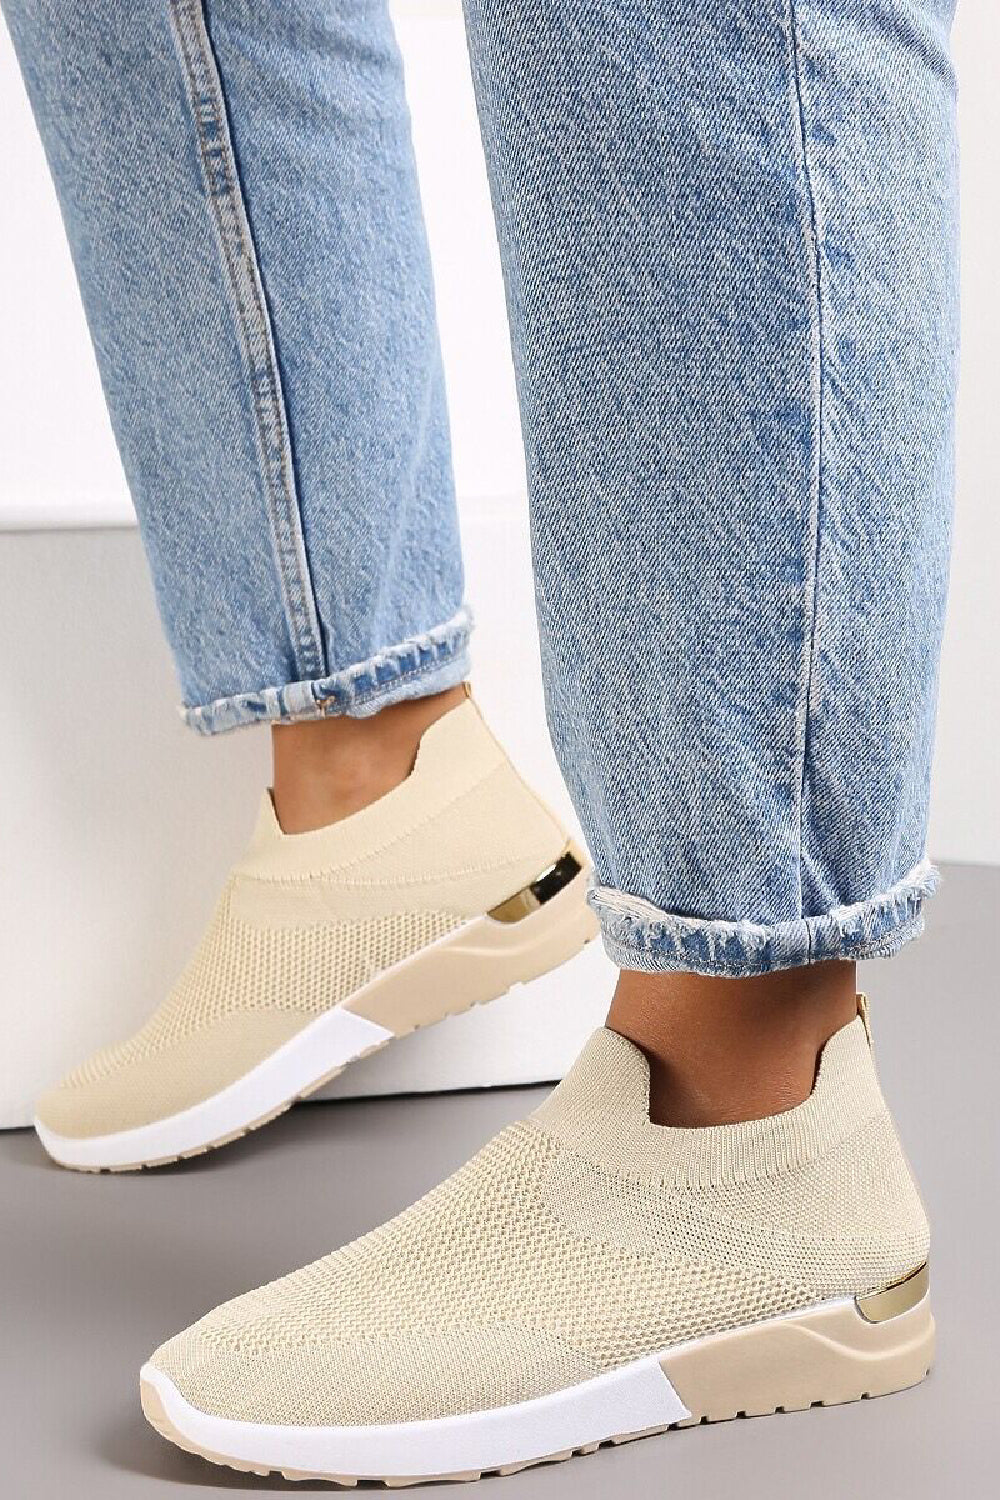 BEIGE SLIP ON GOLD CLIP HEEL DETAIL TRAINERS SHOES